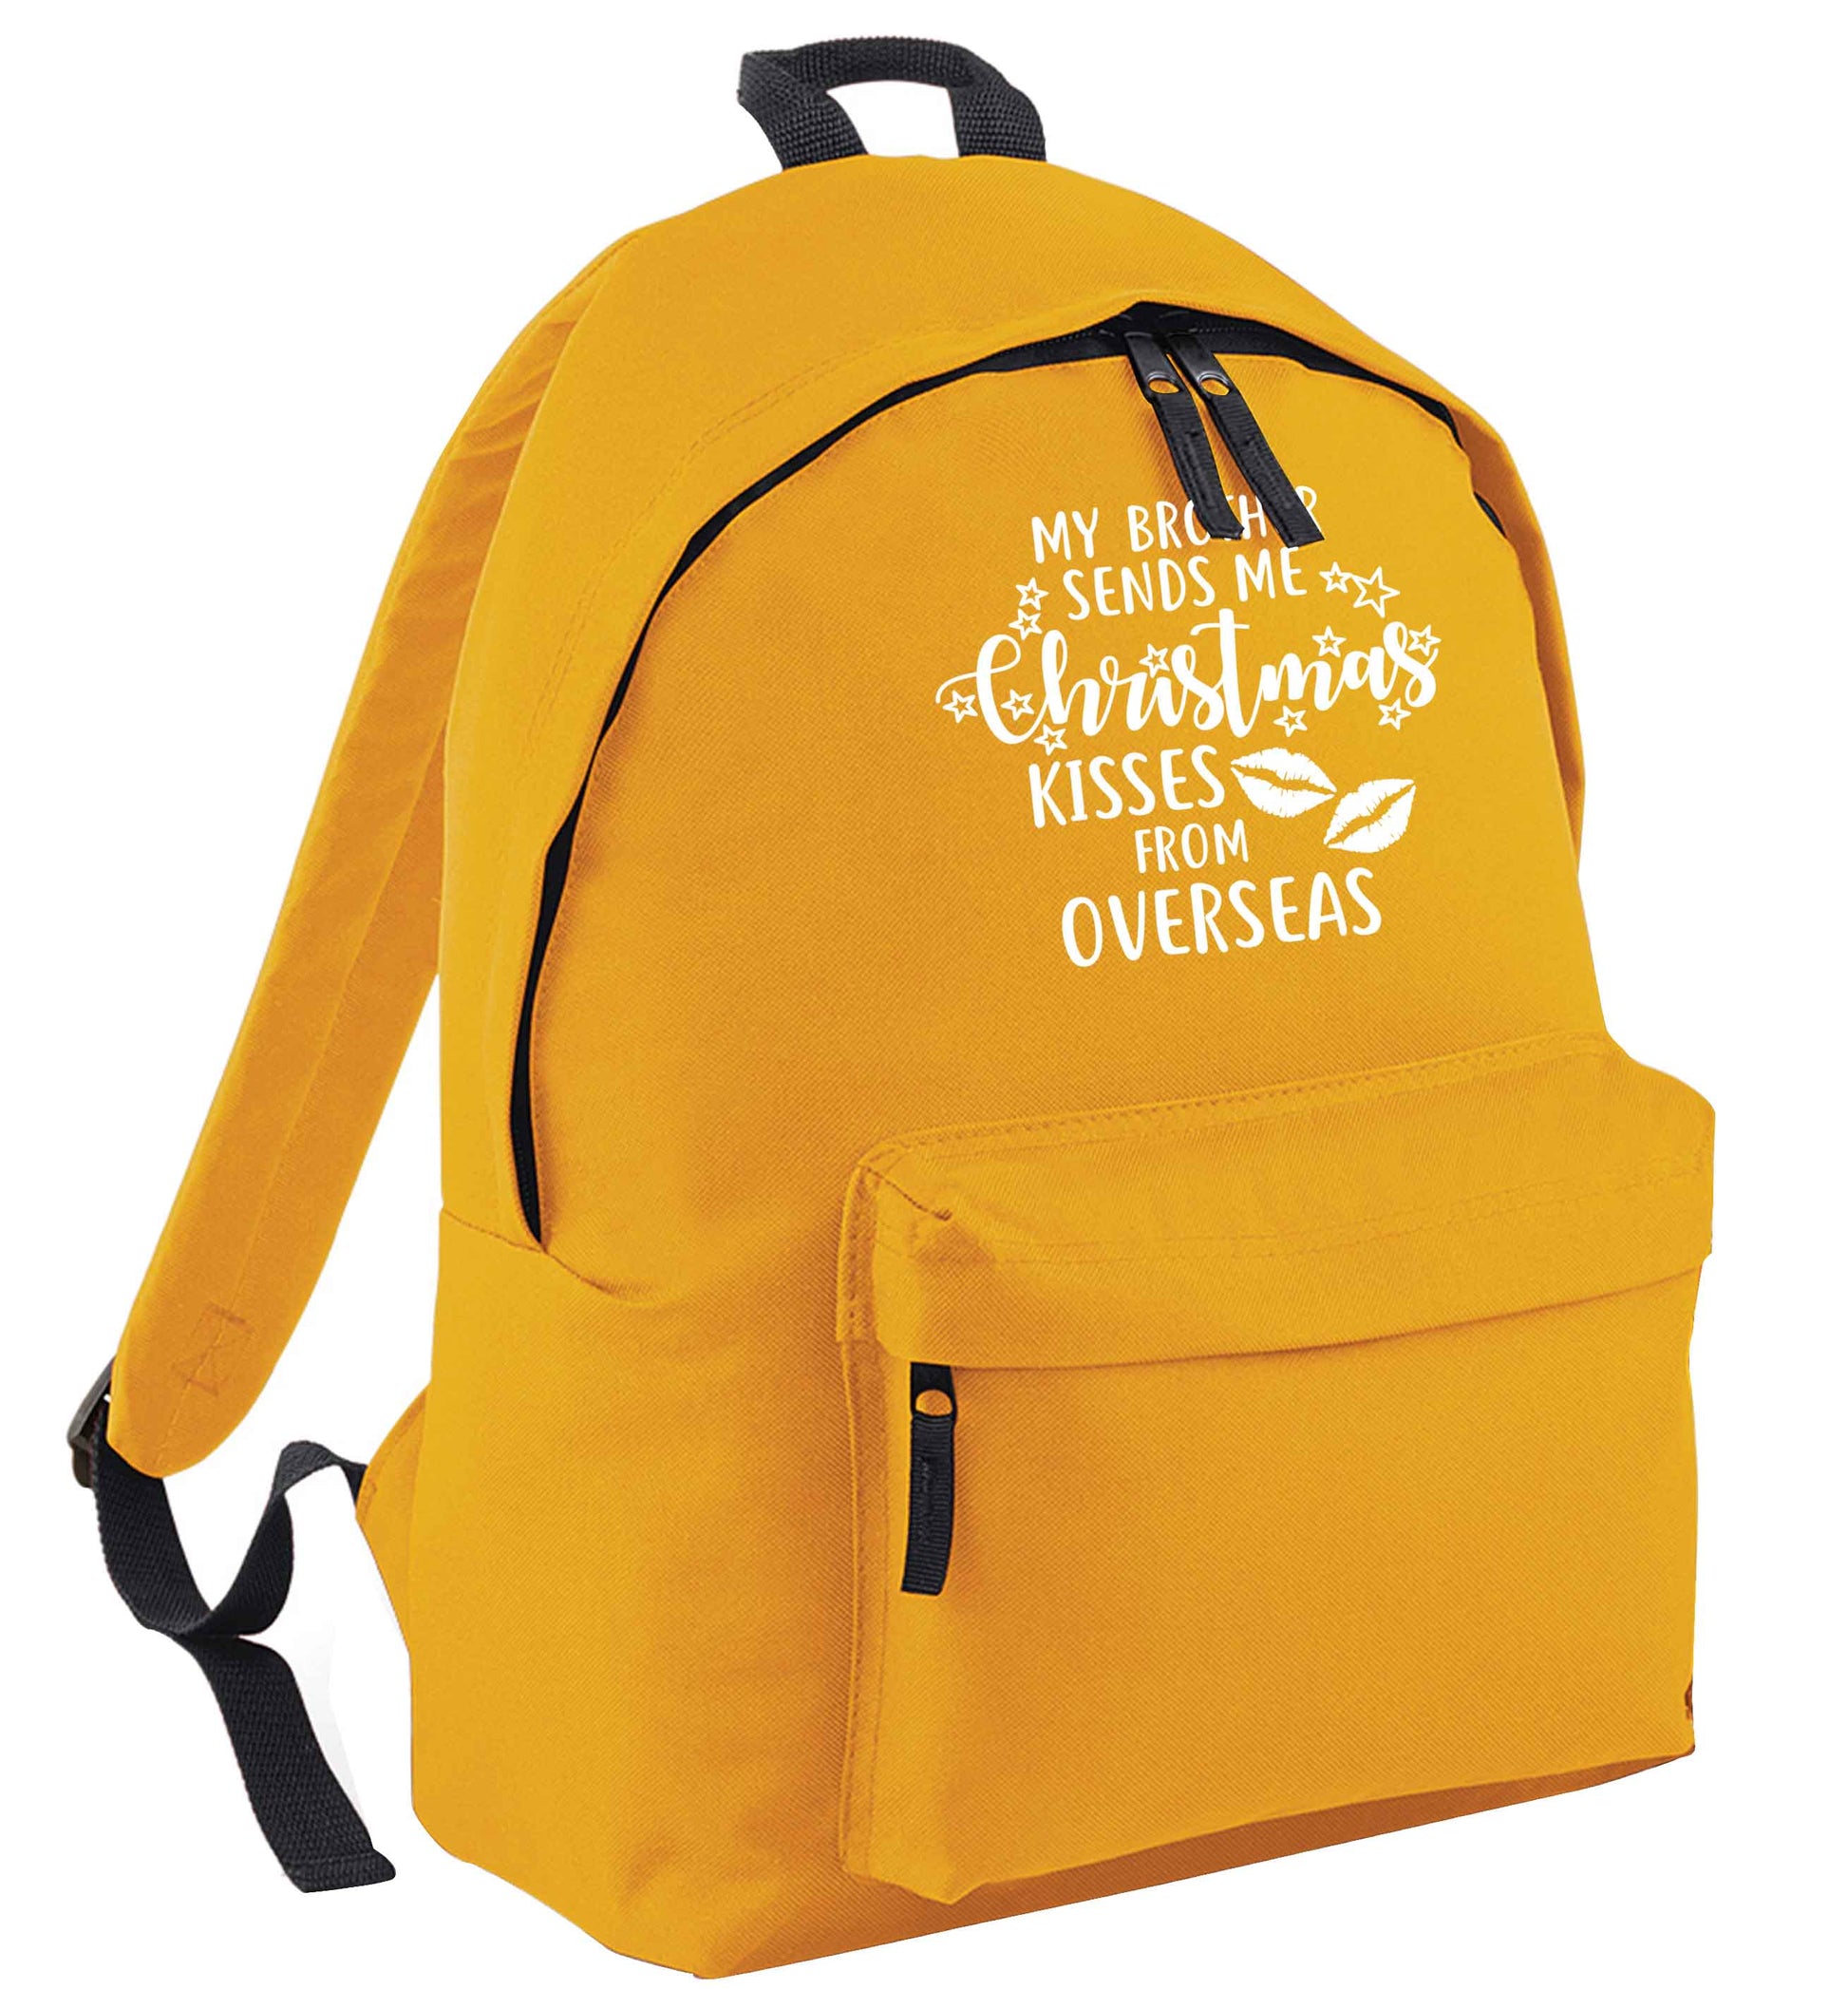 Brother Christmas Kisses Overseas mustard adults backpack